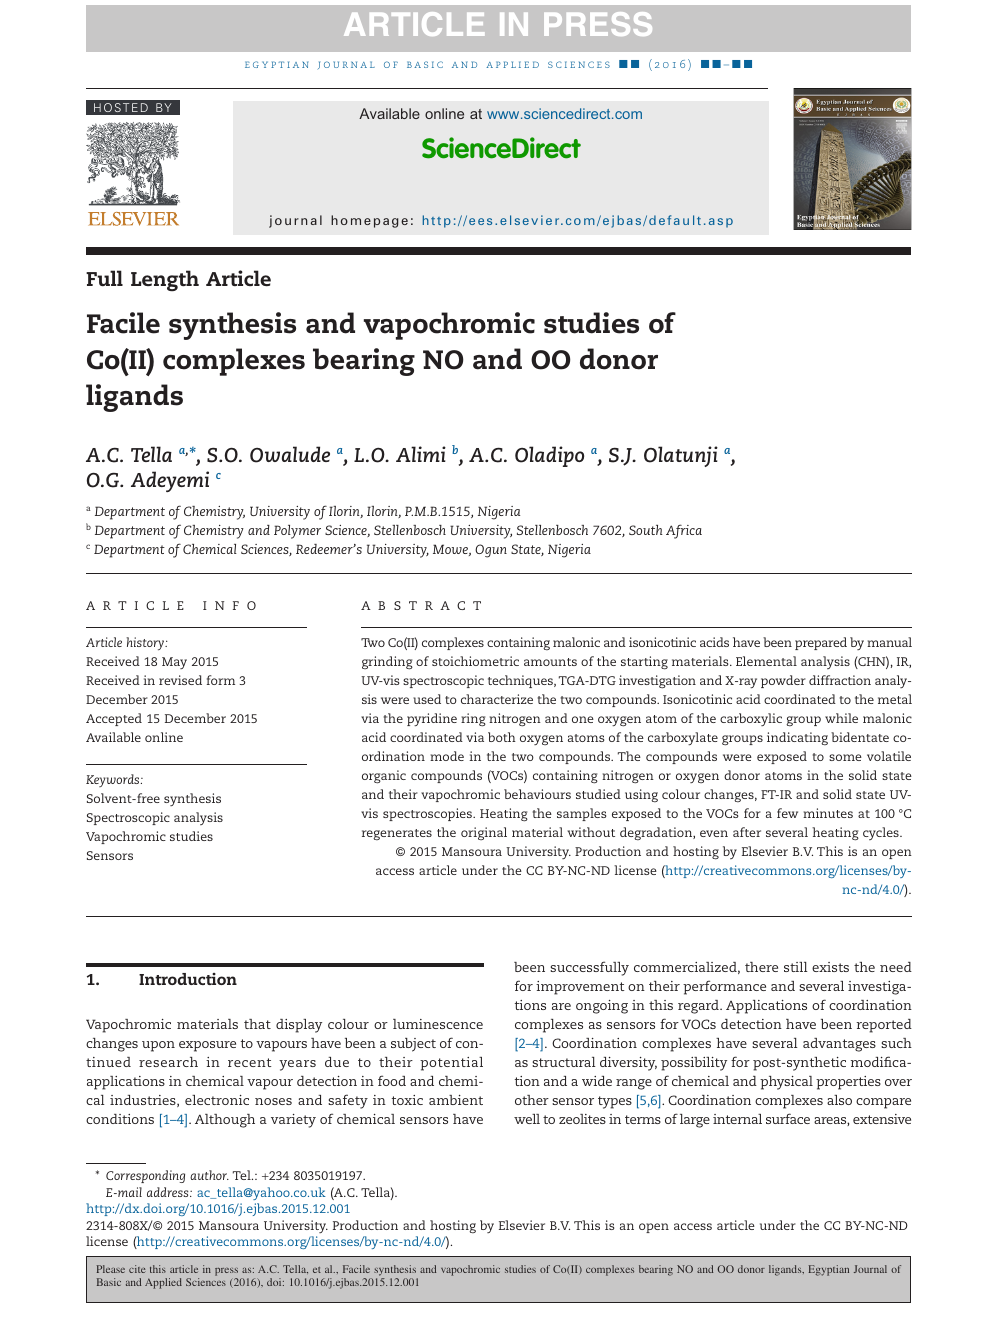 Facile Synthesis And Vapochromic Studies Of Co Ii Complexes Bearing No And Oo Donor Ligands Topic Of Research Paper In Chemical Sciences Download Scholarly Article Pdf And Read For Free On Cyberleninka